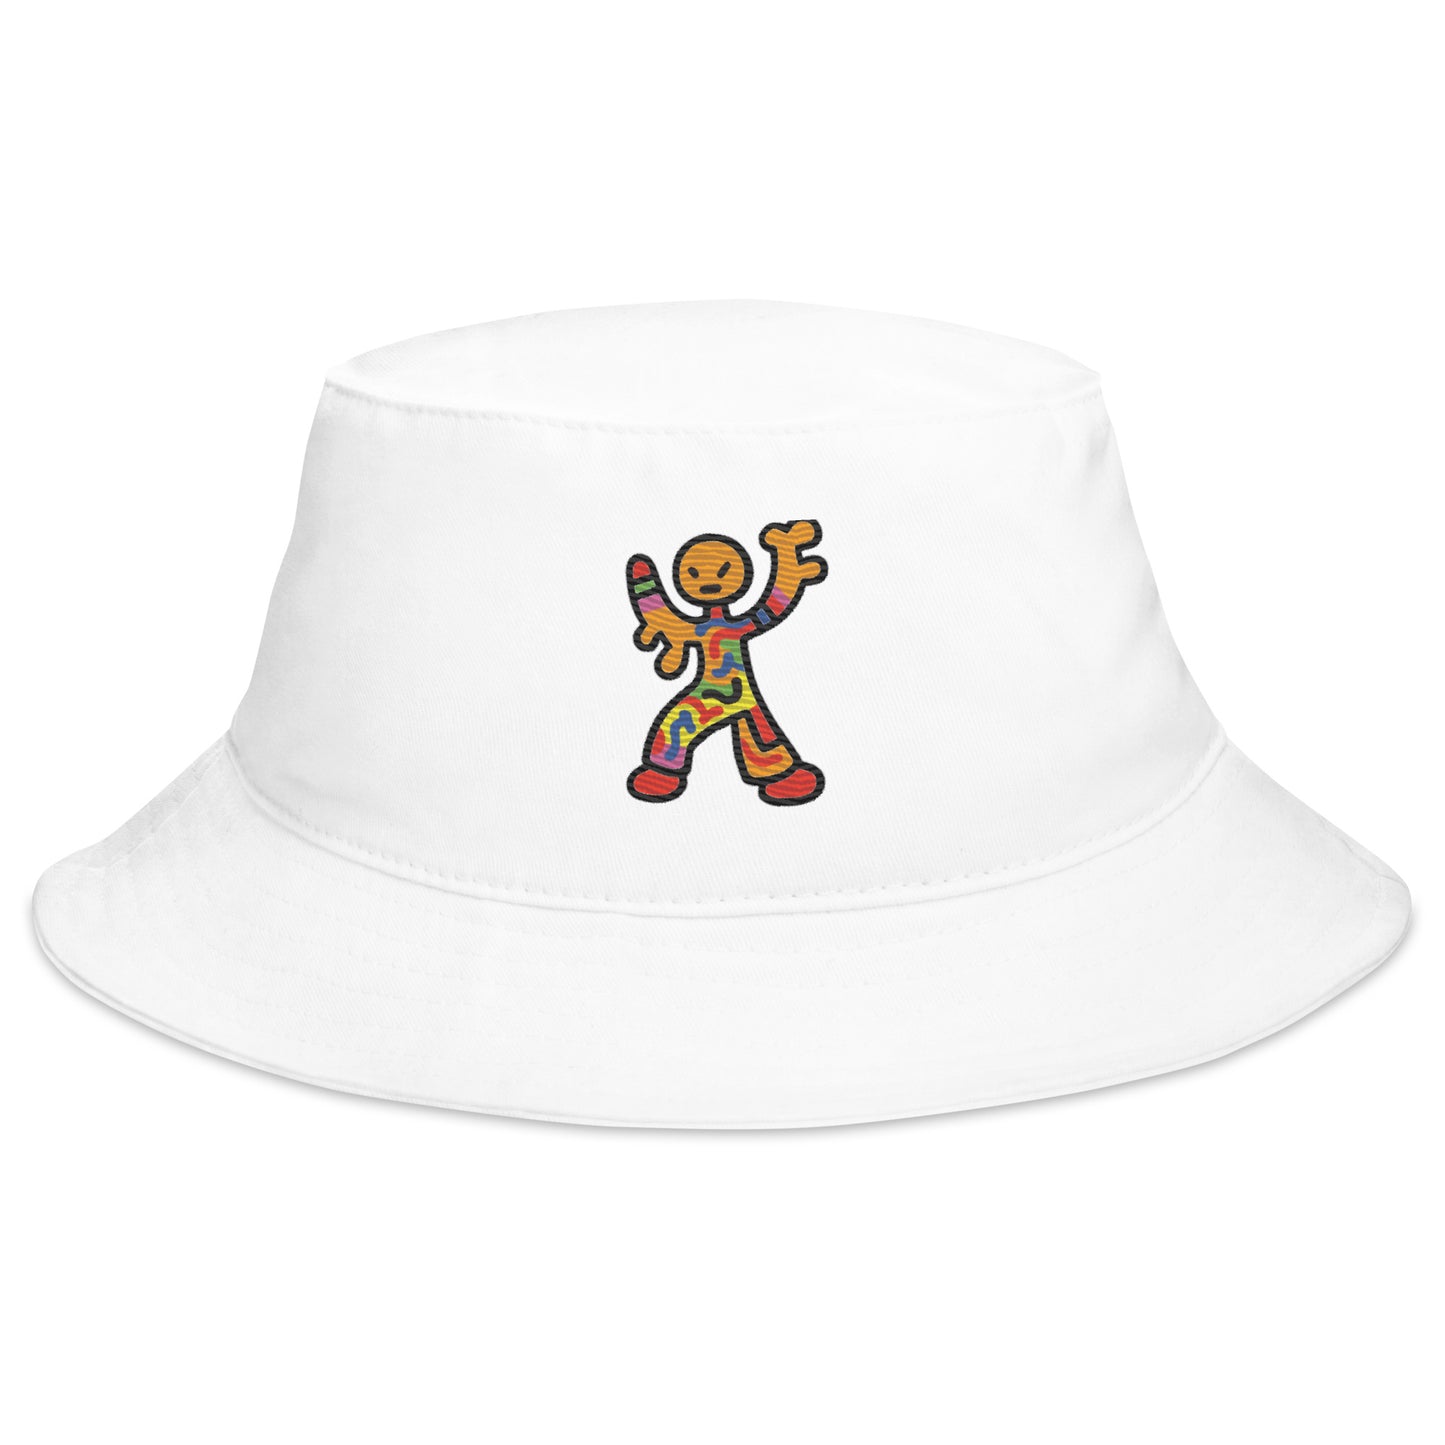 Doodles Me "Most Wanted" Bucket Hat #5